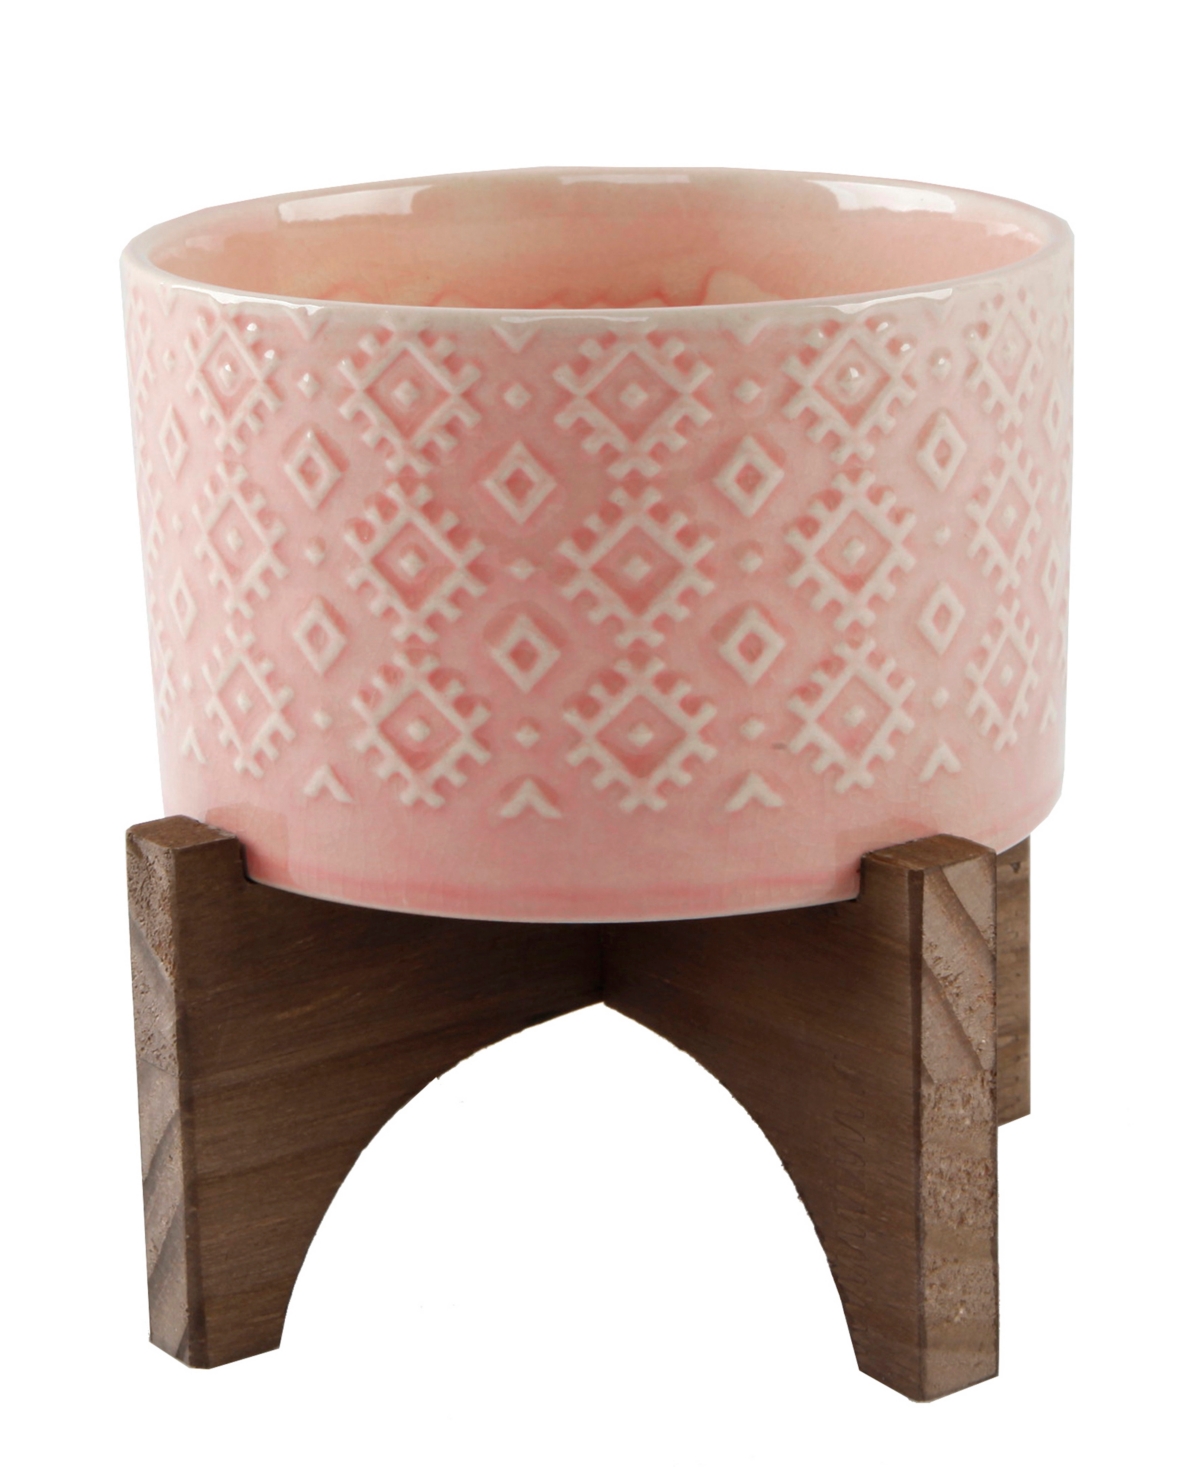 India Ceramic Planter on Wood Stand, 6.25" - Pink